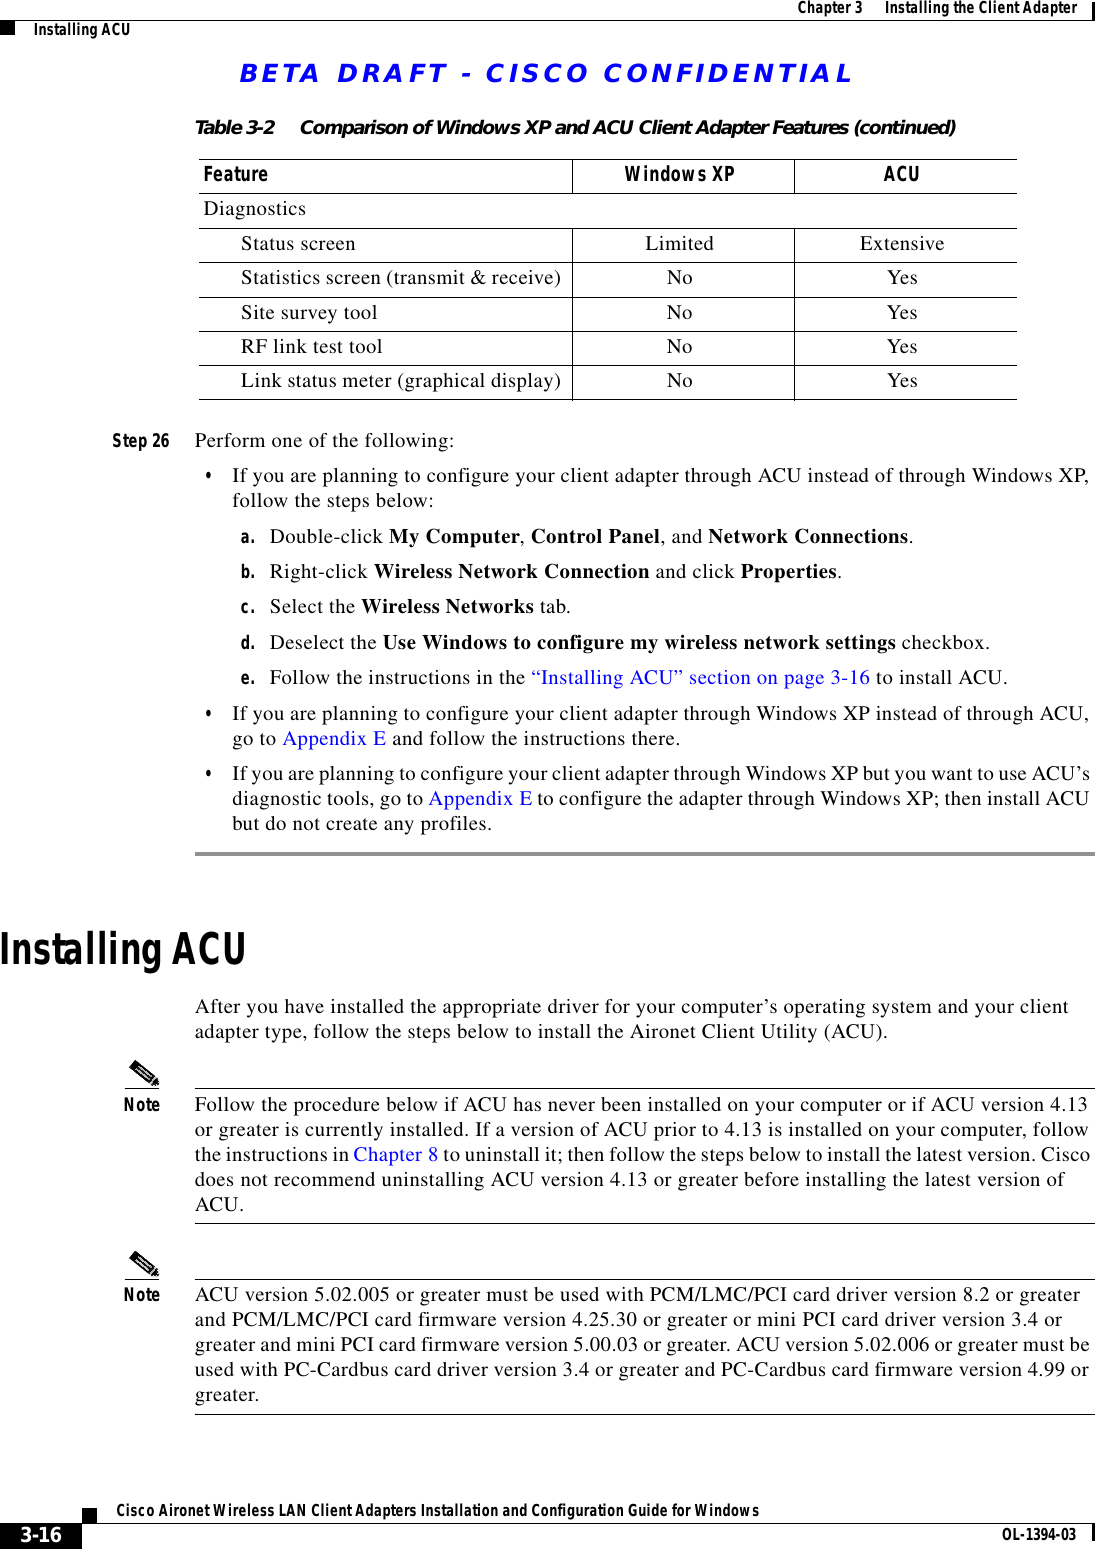 BETA DRAFT - CISCO CONFIDENTIAL3-16Cisco Aironet Wireless LAN Client Adapters Installation and Configuration Guide for Windows OL-1394-03Chapter 3      Installing the Client AdapterInstalling ACUStep 26 Perform one of the following:•If you are planning to configure your client adapter through ACU instead of through Windows XP, follow the steps below:a. Double-click My Computer, Control Panel, and Network Connections.b. Right-click Wireless Network Connection and click Properties.c. Select the Wireless Networks tab.d. Deselect the Use Windows to configure my wireless network settings checkbox.e. Follow the instructions in the “Installing ACU” section on page 3-16 to install ACU.•If you are planning to configure your client adapter through Windows XP instead of through ACU, go to Appendix E and follow the instructions there.•If you are planning to configure your client adapter through Windows XP but you want to use ACU’s diagnostic tools, go to Appendix E to configure the adapter through Windows XP; then install ACU but do not create any profiles.Installing ACUAfter you have installed the appropriate driver for your computer’s operating system and your client adapter type, follow the steps below to install the Aironet Client Utility (ACU).Note Follow the procedure below if ACU has never been installed on your computer or if ACU version 4.13 or greater is currently installed. If a version of ACU prior to 4.13 is installed on your computer, follow the instructions in Chapter 8 to uninstall it; then follow the steps below to install the latest version. Cisco does not recommend uninstalling ACU version 4.13 or greater before installing the latest version of ACU.Note ACU version 5.02.005 or greater must be used with PCM/LMC/PCI card driver version 8.2 or greater and PCM/LMC/PCI card firmware version 4.25.30 or greater or mini PCI card driver version 3.4 or greater and mini PCI card firmware version 5.00.03 or greater. ACU version 5.02.006 or greater must be used with PC-Cardbus card driver version 3.4 or greater and PC-Cardbus card firmware version 4.99 or greater.Diagnostics Status screen Limited ExtensiveStatistics screen (transmit &amp; receive) No YesSite survey tool No YesRF link test tool No YesLink status meter (graphical display) No YesTable 3-2 Comparison of Windows XP and ACU Client Adapter Features (continued)Feature Windows XP ACU